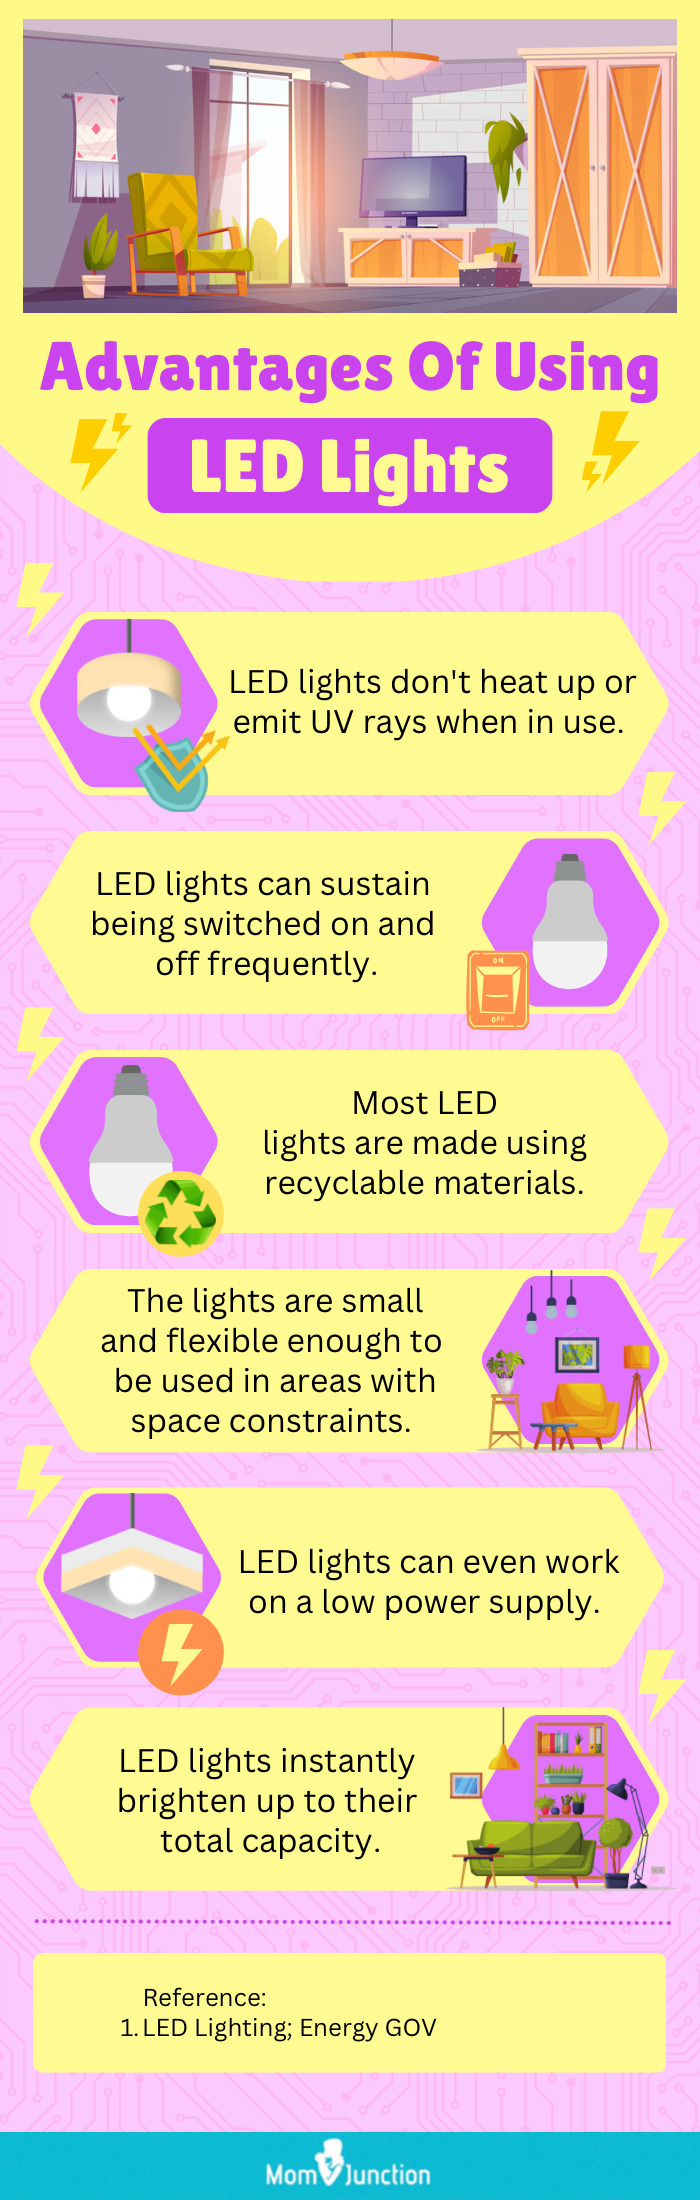 Advantages Of Using LED Lights (infographic)